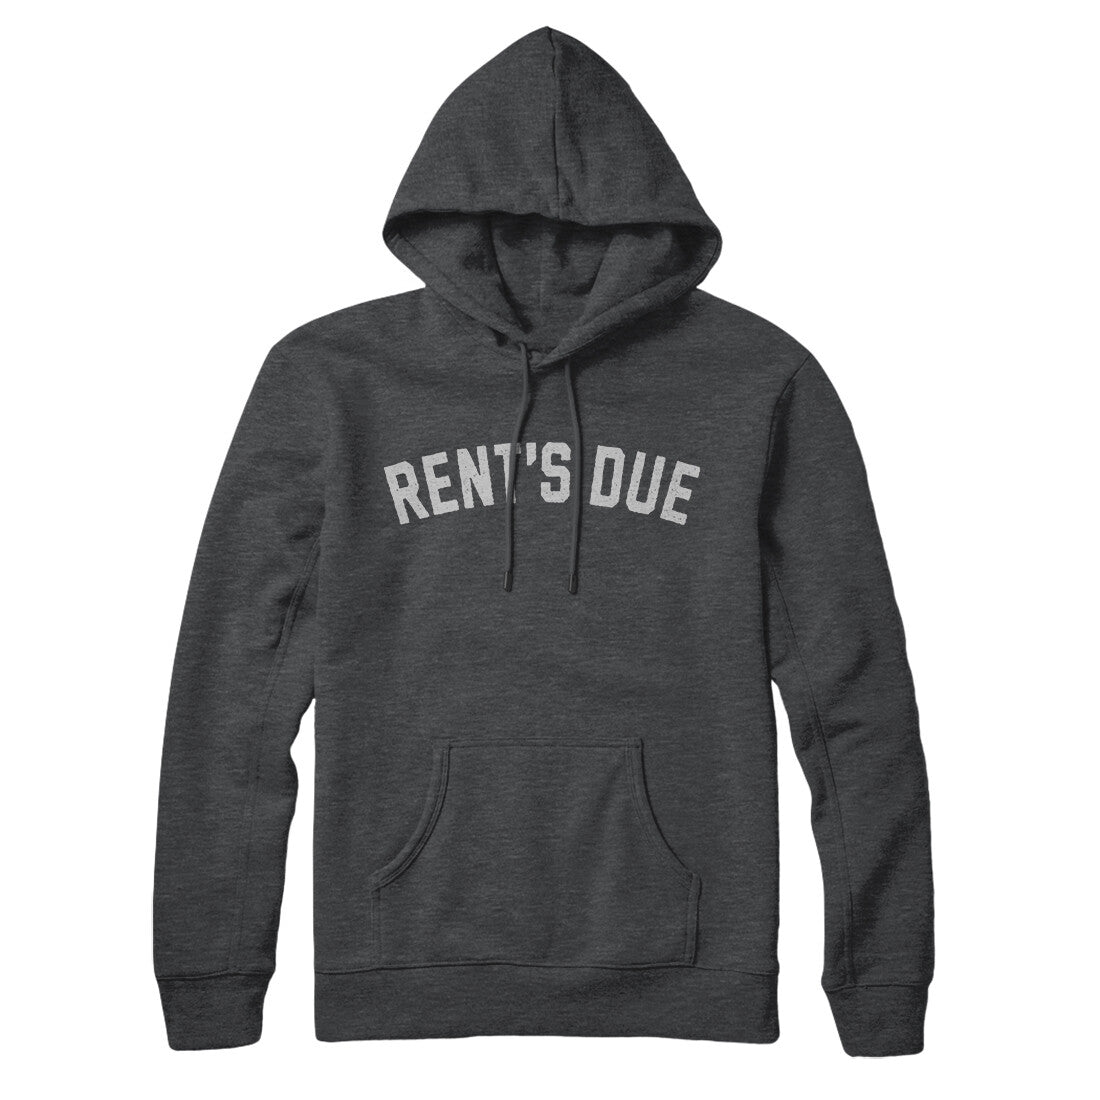 Rent's Due in Charcoal Heather Color